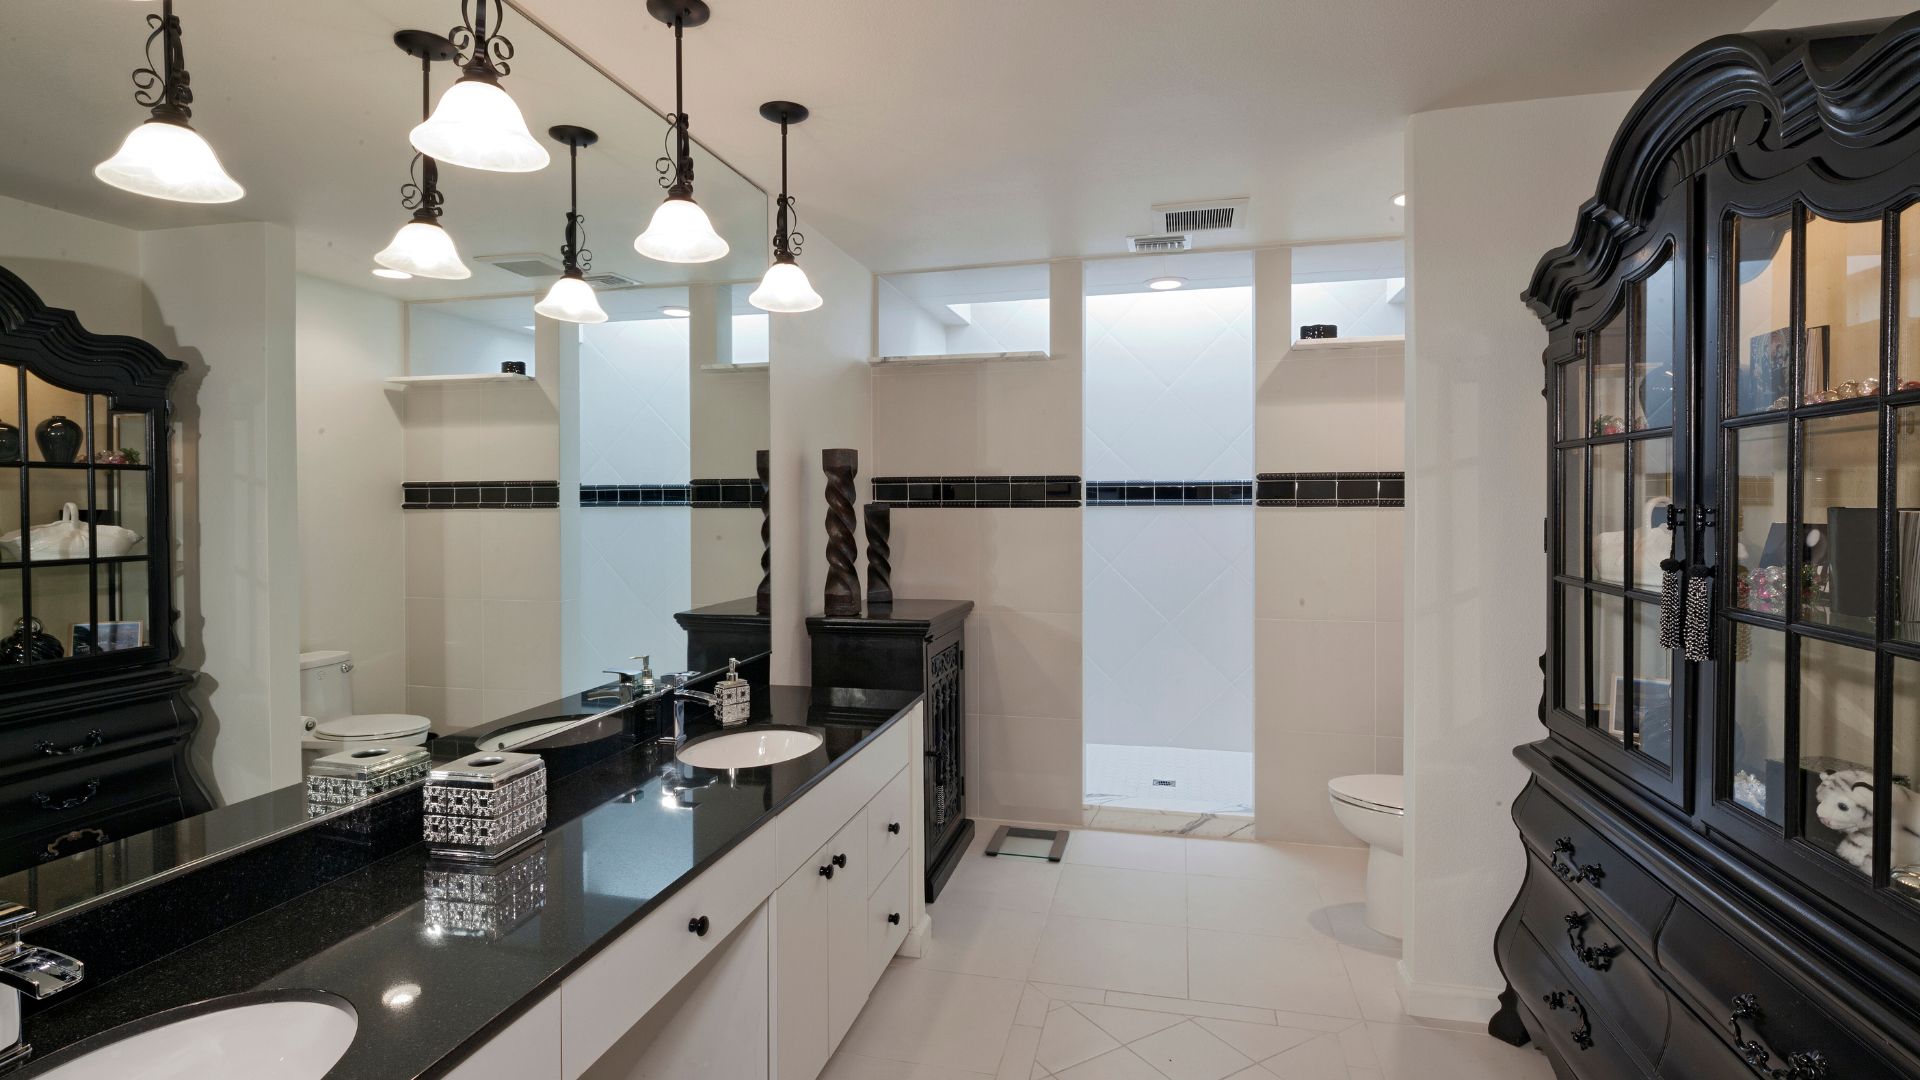 A modern bathroom with white cabinetry and black counters.